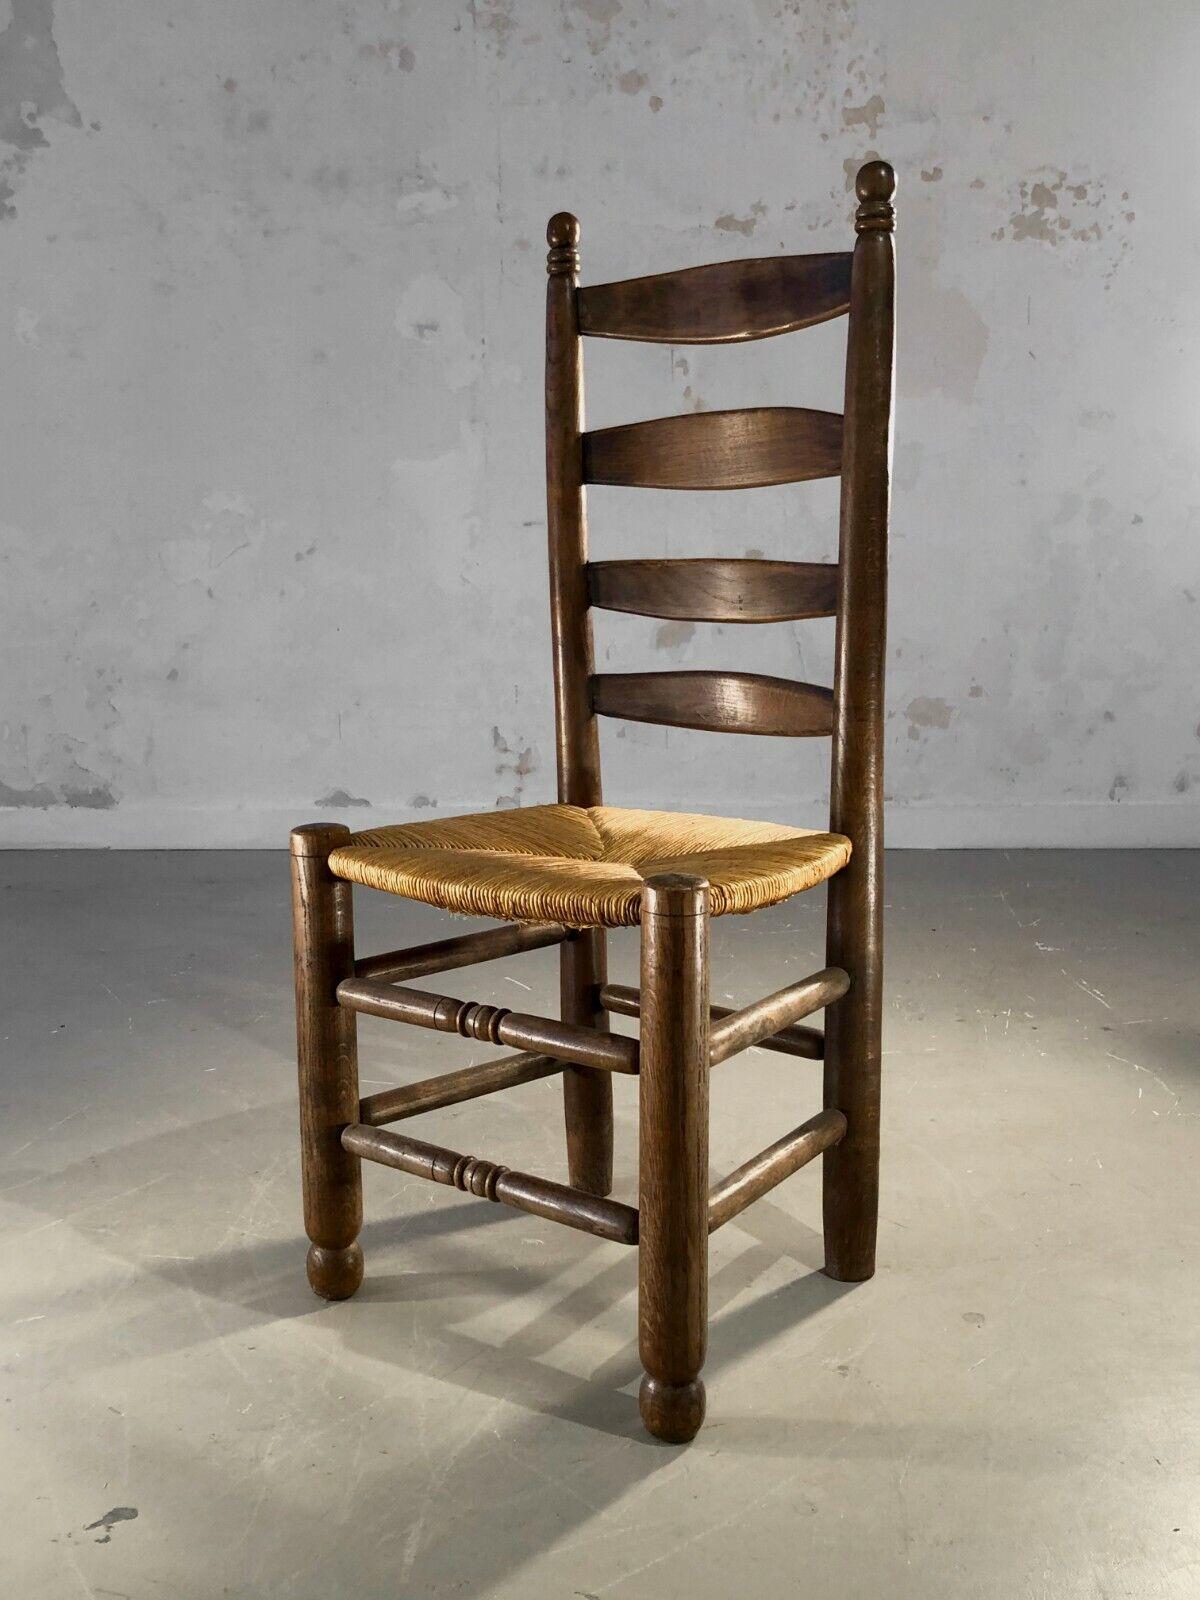 Brutalist 8 BRUTALIST RUSTIC MODERN Modernist CHAIRS by CHARLES DUDOUYDT, France 1950 For Sale